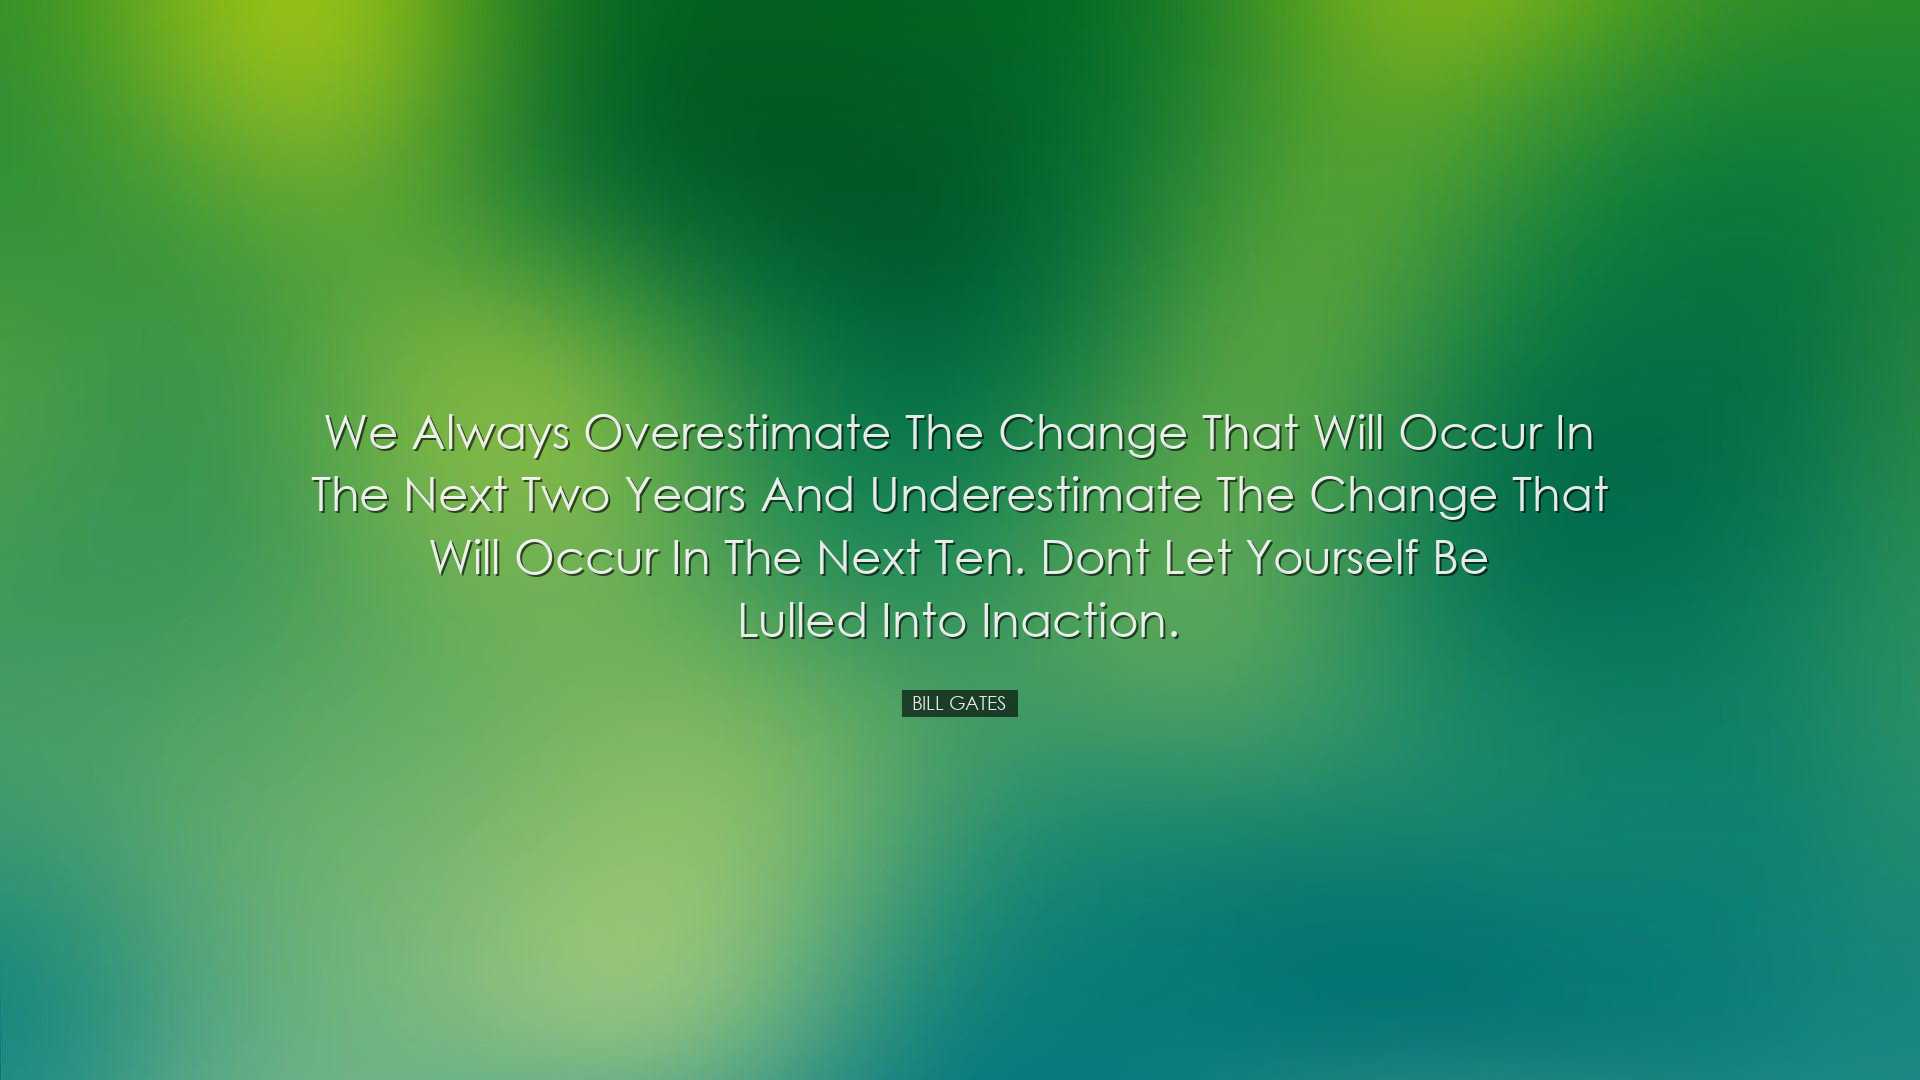 We always overestimate the change that will occur in the next two